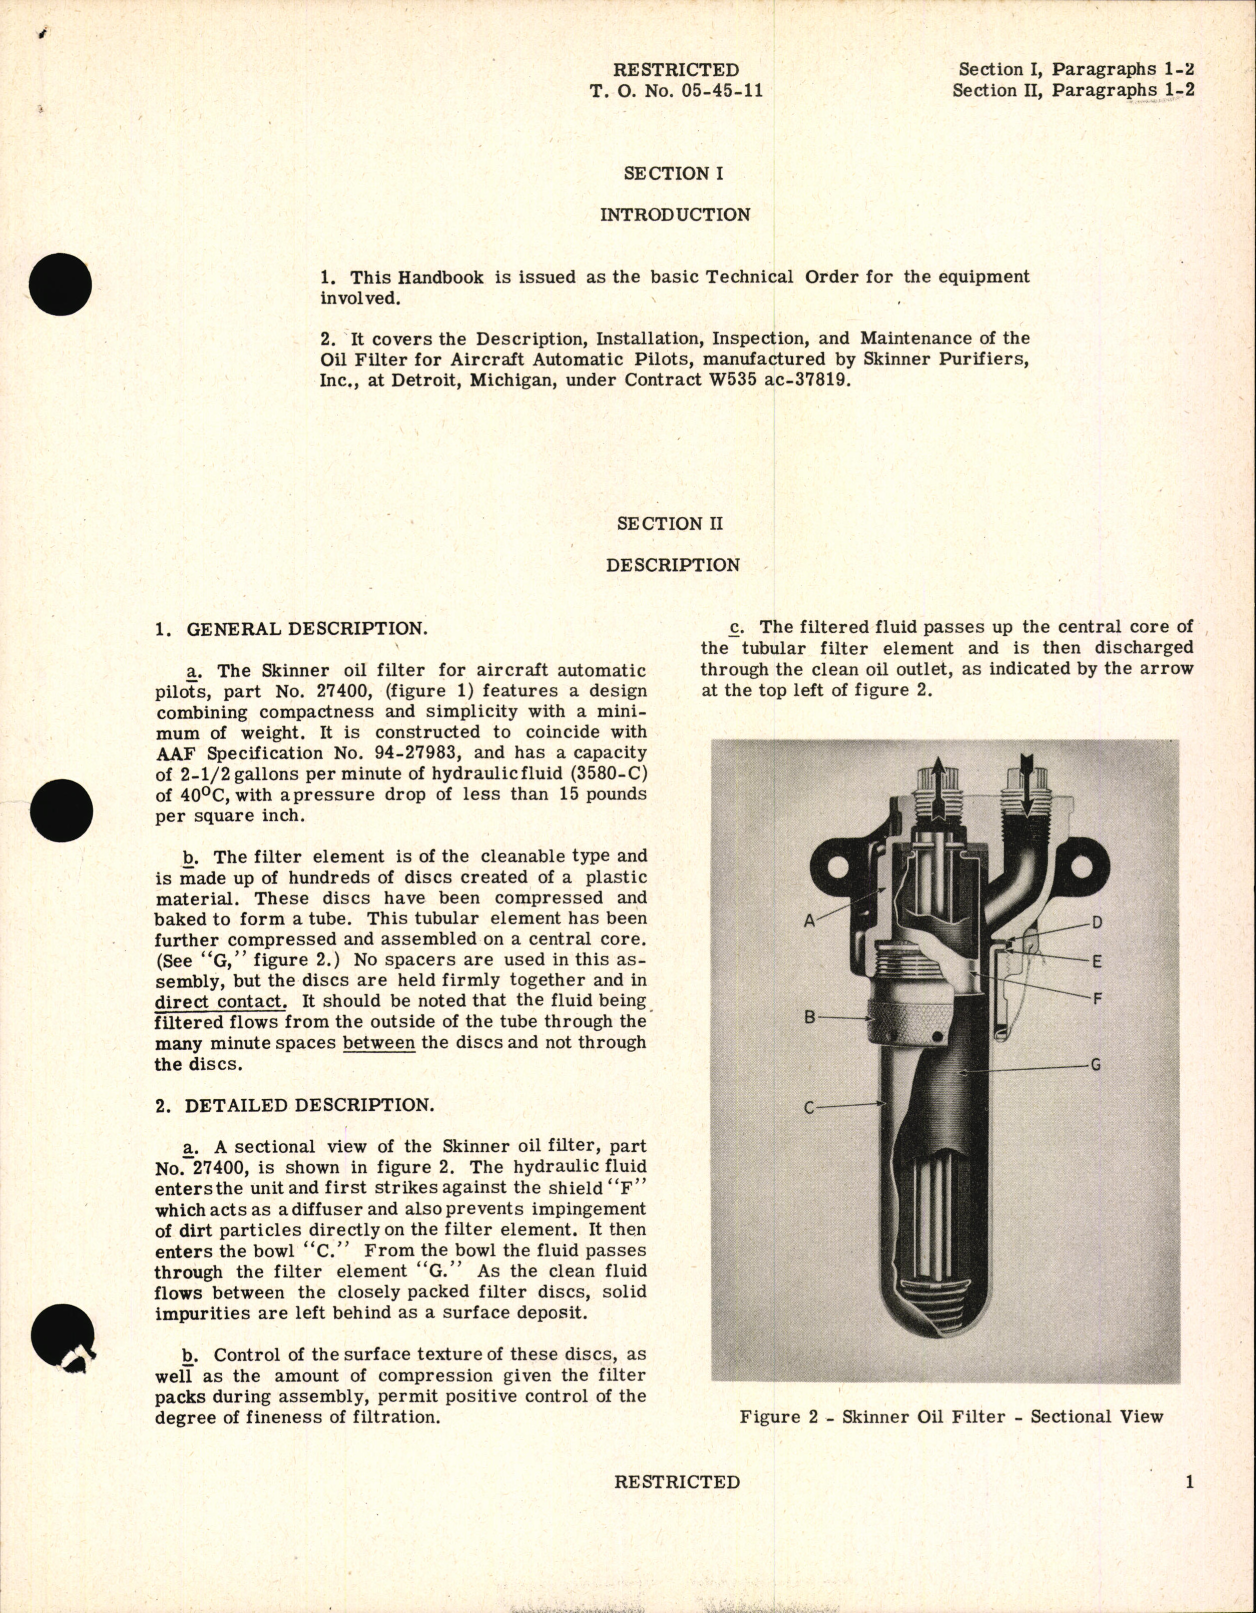 Sample page 5 from AirCorps Library document: Handbook of Instructions with Parts Catalog for Oil Filters for Aircraft Automatic Pilots